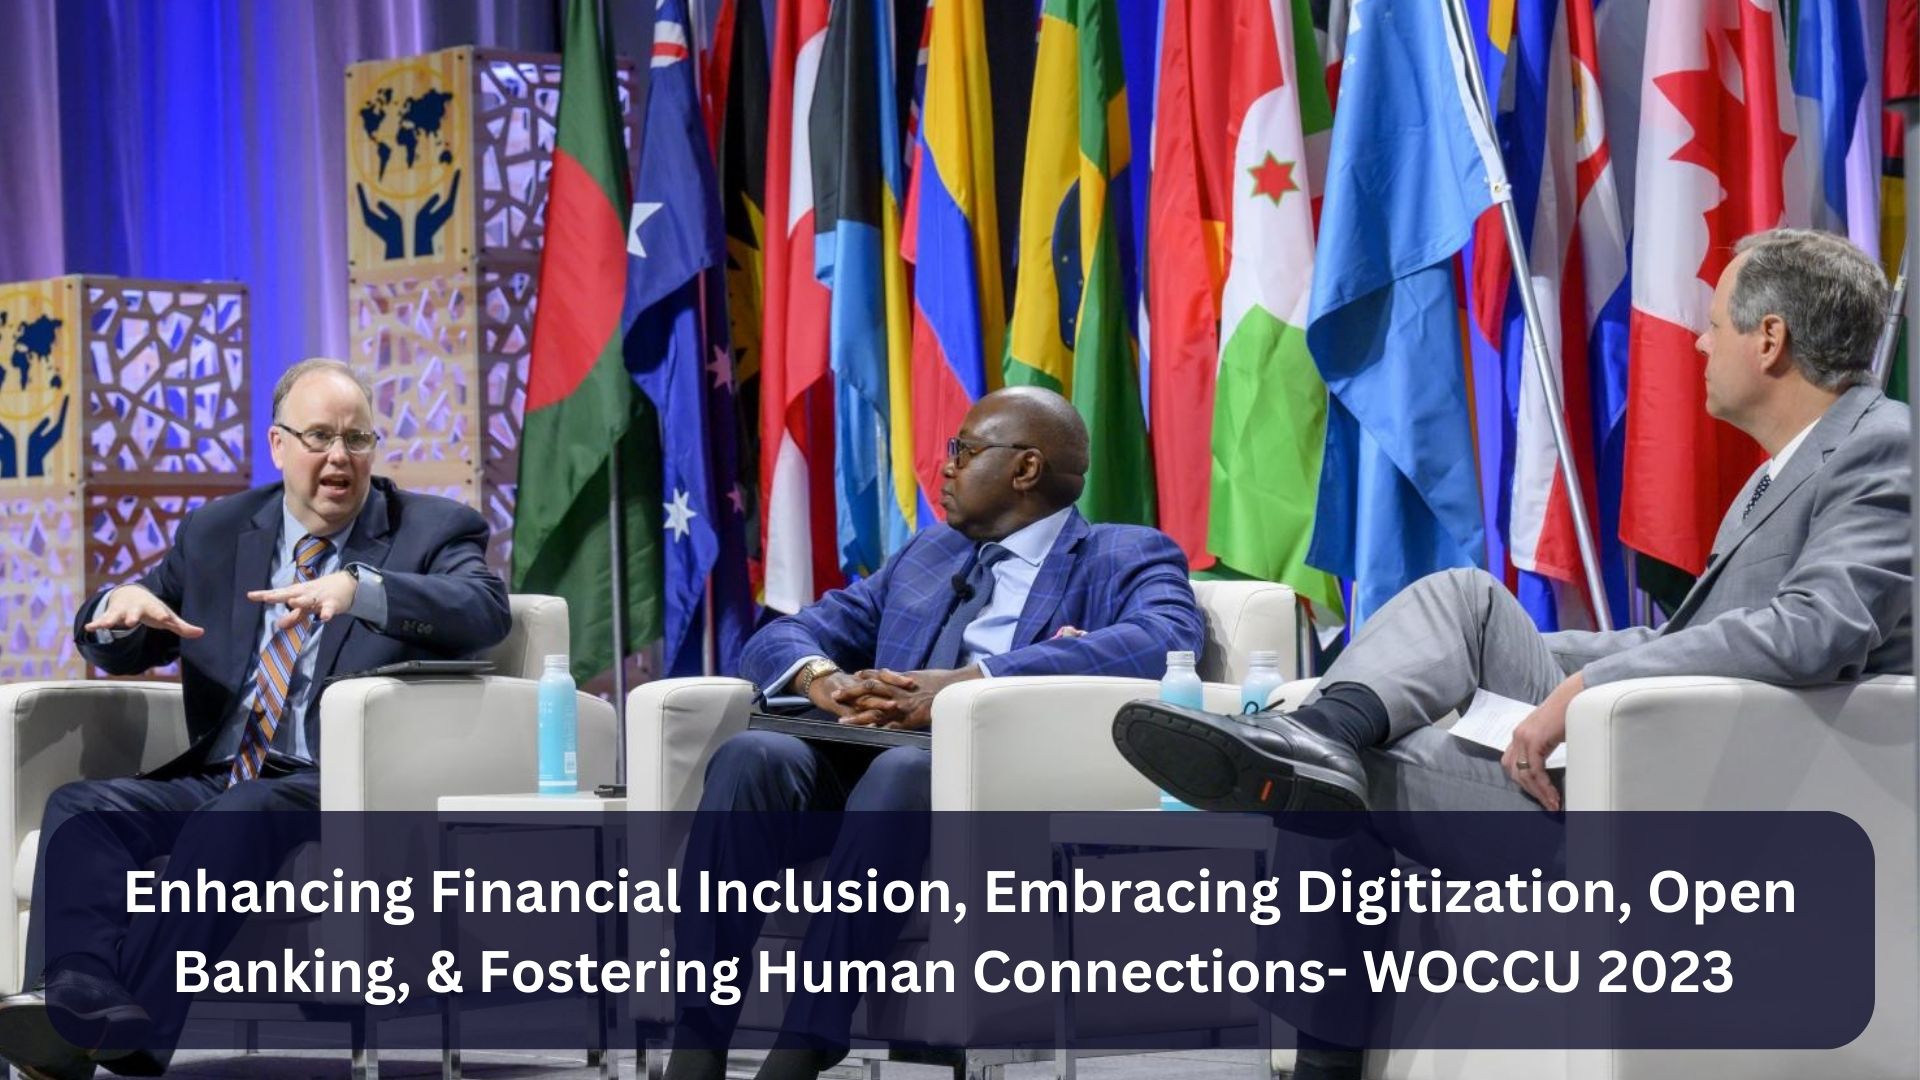 Enhancing Financial Inclusion, Embracing Digitization, Open Banking, & Fostering Human Connections- WOCCU 2023